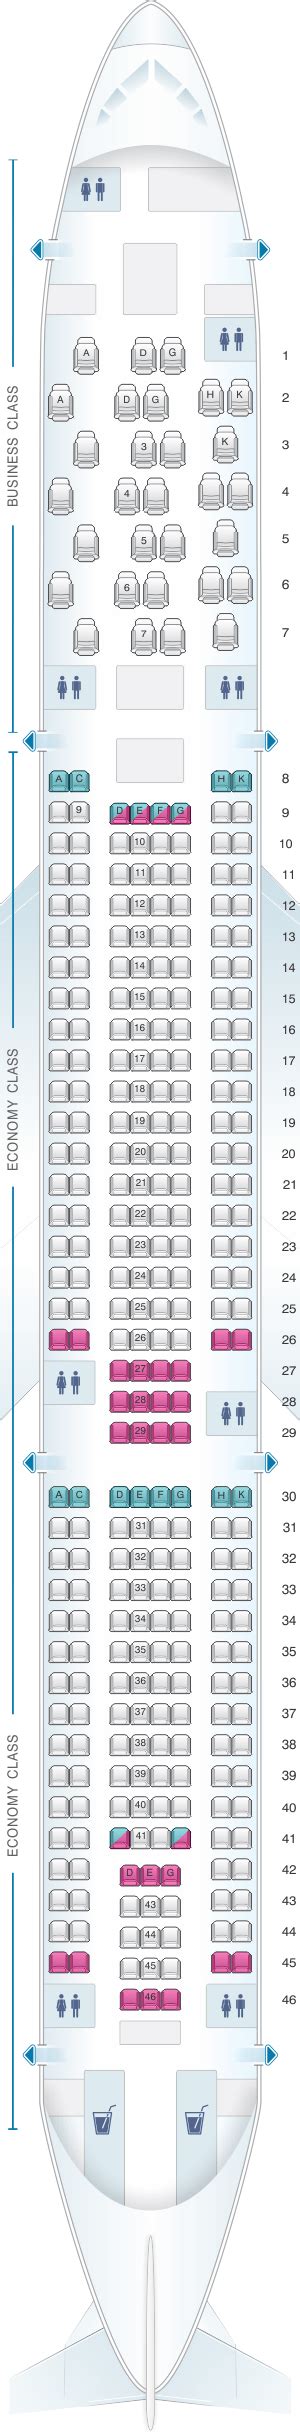 Aer Lingus Seat Assignments Awesome Home